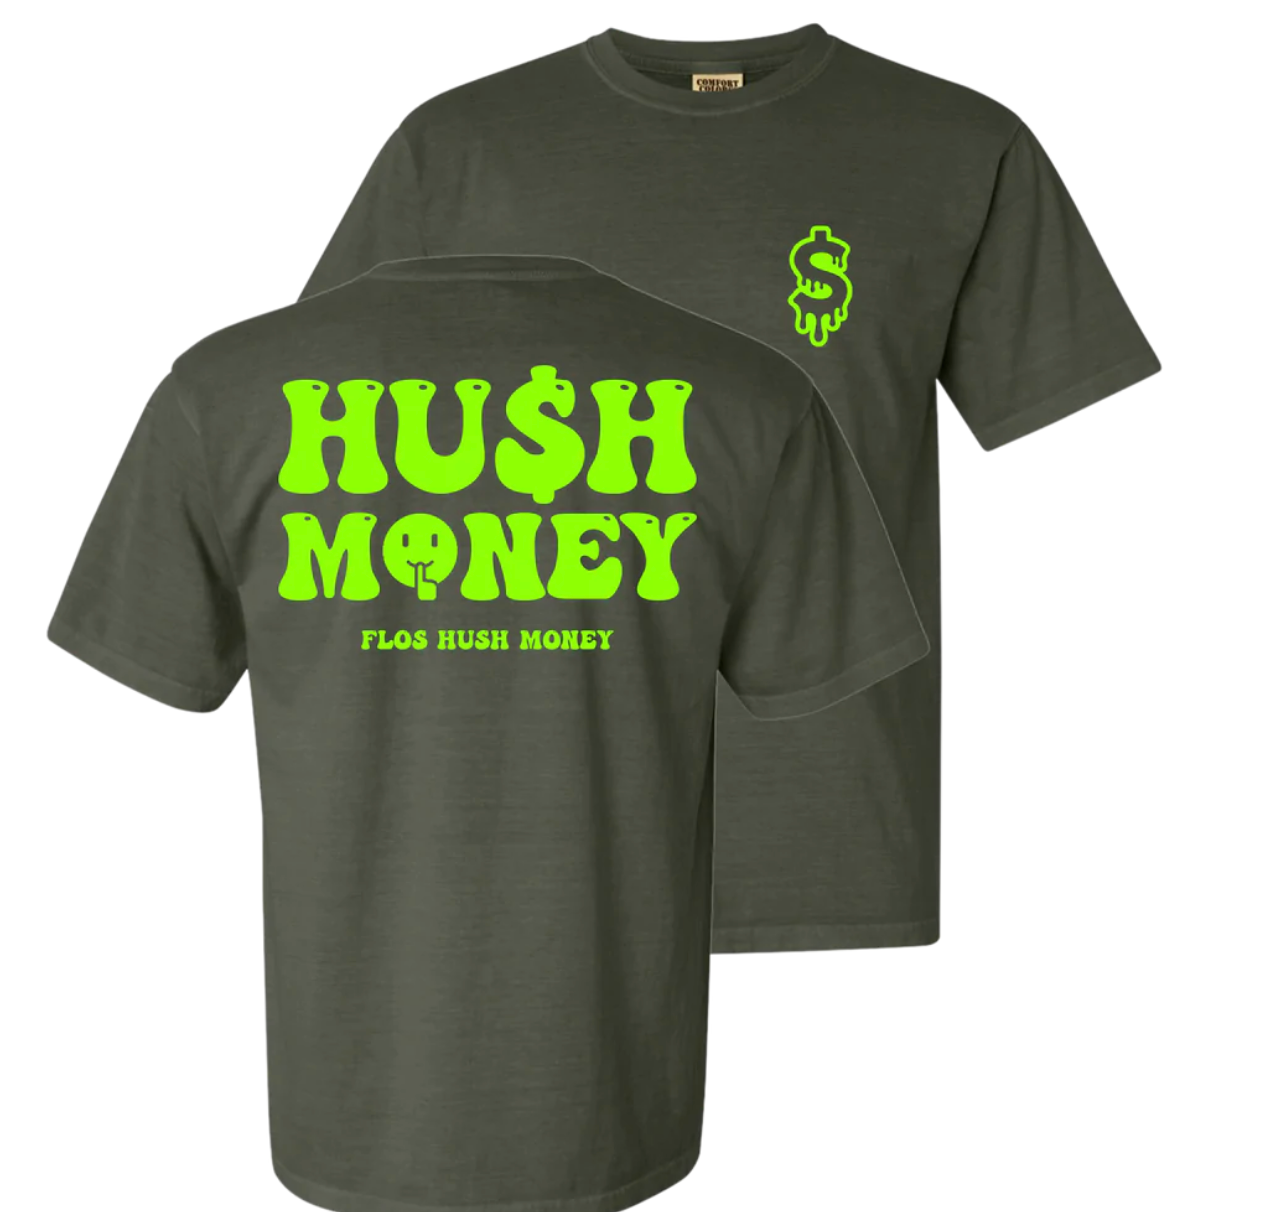 Ranch Dress'n Hush Money - Dynasty Collection Tee